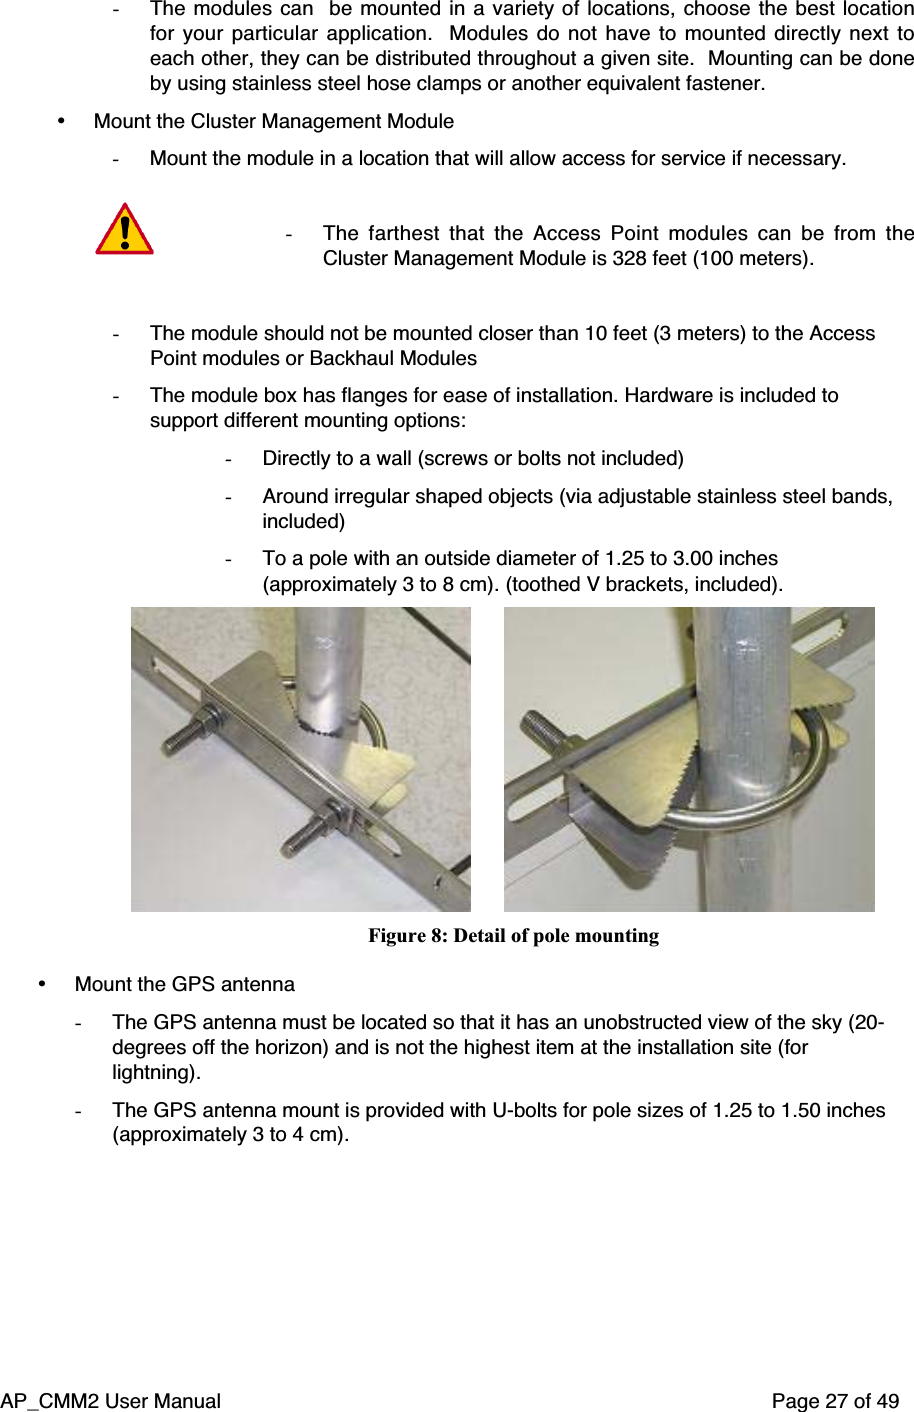 AP_CMM2 User Manual Page 27 of 49- The modules can  be mounted in a variety of locations, choose the best locationfor your particular application.   Modules do not have to mounted directly next toeach other, they can be distributed throughout a given site.  Mounting can be doneby using stainless steel hose clamps or another equivalent fastener.• Mount the Cluster Management Module- Mount the module in a location that will allow access for service if necessary.- The farthest that the Access Point modules can be from theCluster Management Module is 328 feet (100 meters).- The module should not be mounted closer than 10 feet (3 meters) to the AccessPoint modules or Backhaul Modules- The module box has flanges for ease of installation. Hardware is included tosupport different mounting options:- Directly to a wall (screws or bolts not included)- Around irregular shaped objects (via adjustable stainless steel bands,included)- To a pole with an outside diameter of 1.25 to 3.00 inches(approximately 3 to 8 cm). (toothed V brackets, included).                              Figure 8: Detail of pole mounting• Mount the GPS antenna- The GPS antenna must be located so that it has an unobstructed view of the sky (20-degrees off the horizon) and is not the highest item at the installation site (forlightning).- The GPS antenna mount is provided with U-bolts for pole sizes of 1.25 to 1.50 inches(approximately 3 to 4 cm).